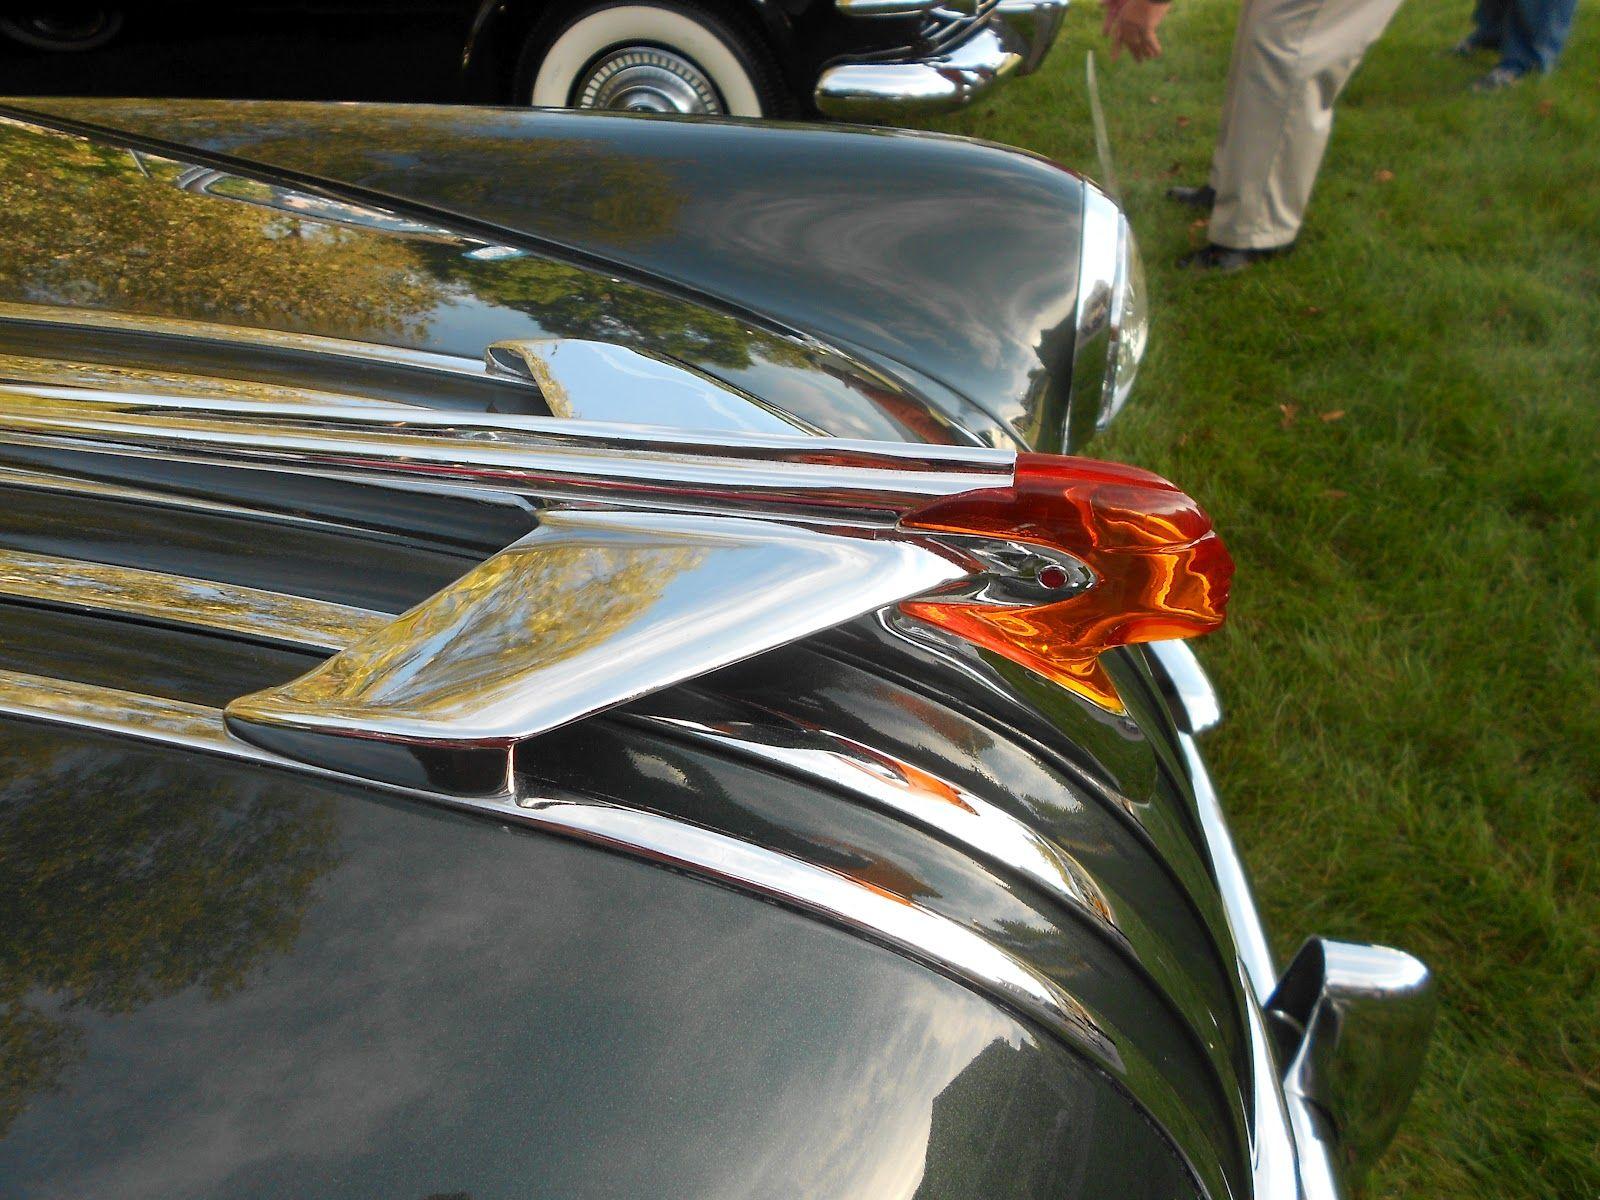 Upside Down Pontiac Logo - The Automobile and American Life: The Dayton Concours, September 16 ...